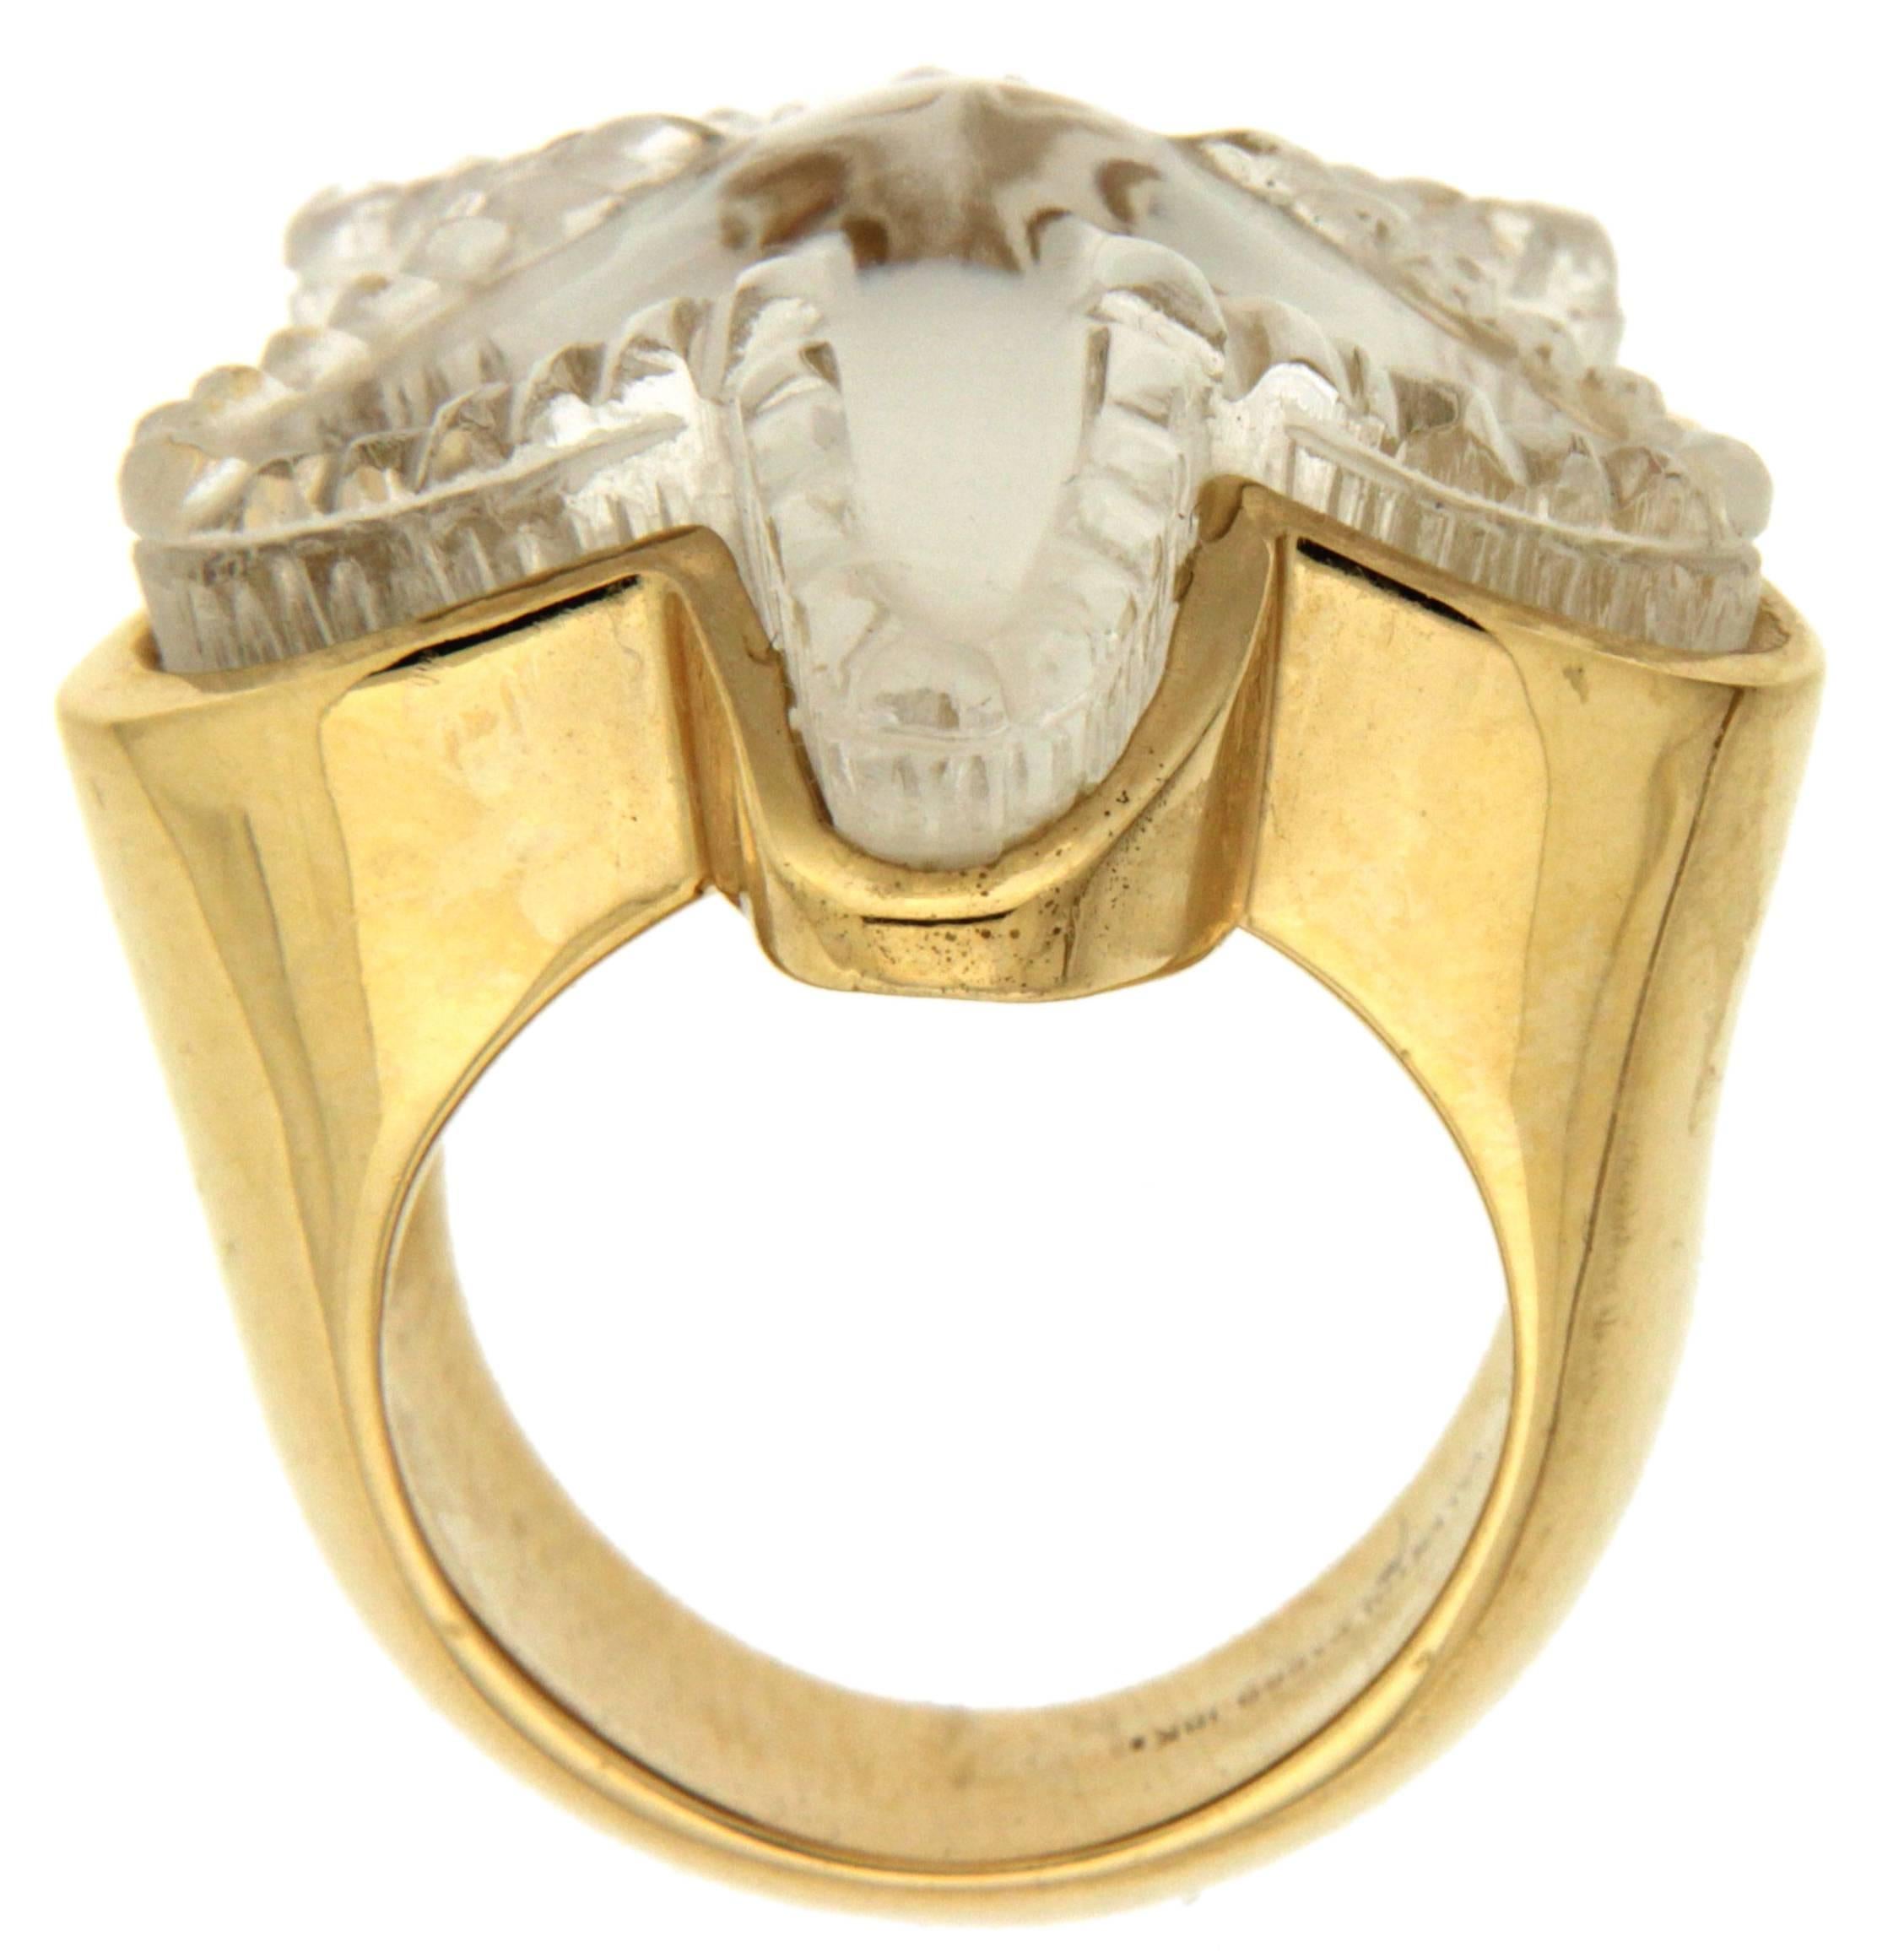 This starfish ring is made in 18kt yellow gold, it features a special cut crystal and mother of pearl beneath the crystal.